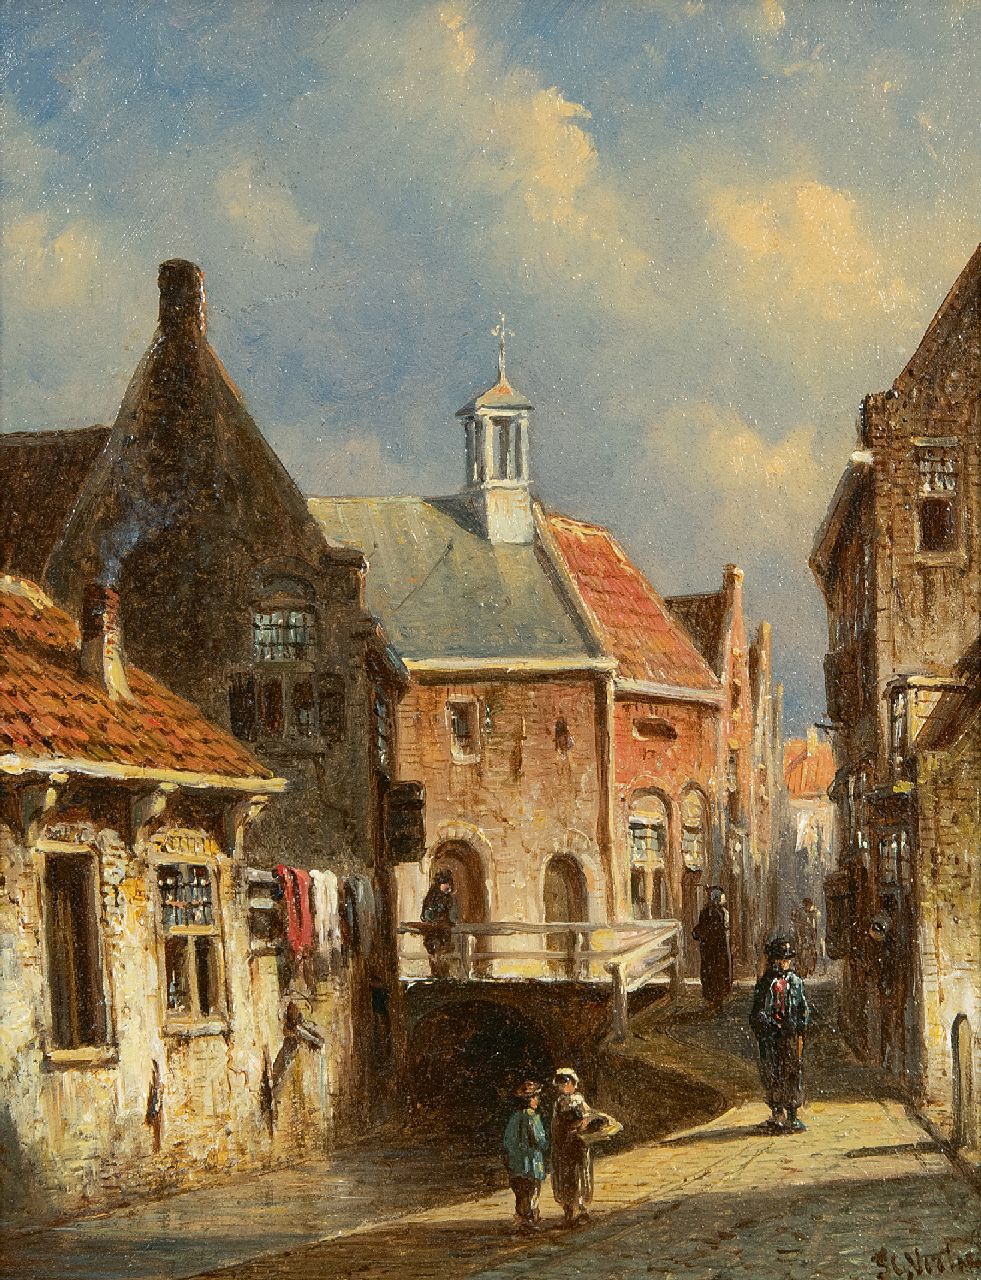 Vertin P.G.  | Petrus Gerardus Vertin | Paintings offered for sale | Sunny city canal with drying laundry -  Zakkendragershuisje en het Achterwater te Delfshaven, Rotterdam, oil on panel 19.0 x 15.0 cm, signed l.r.